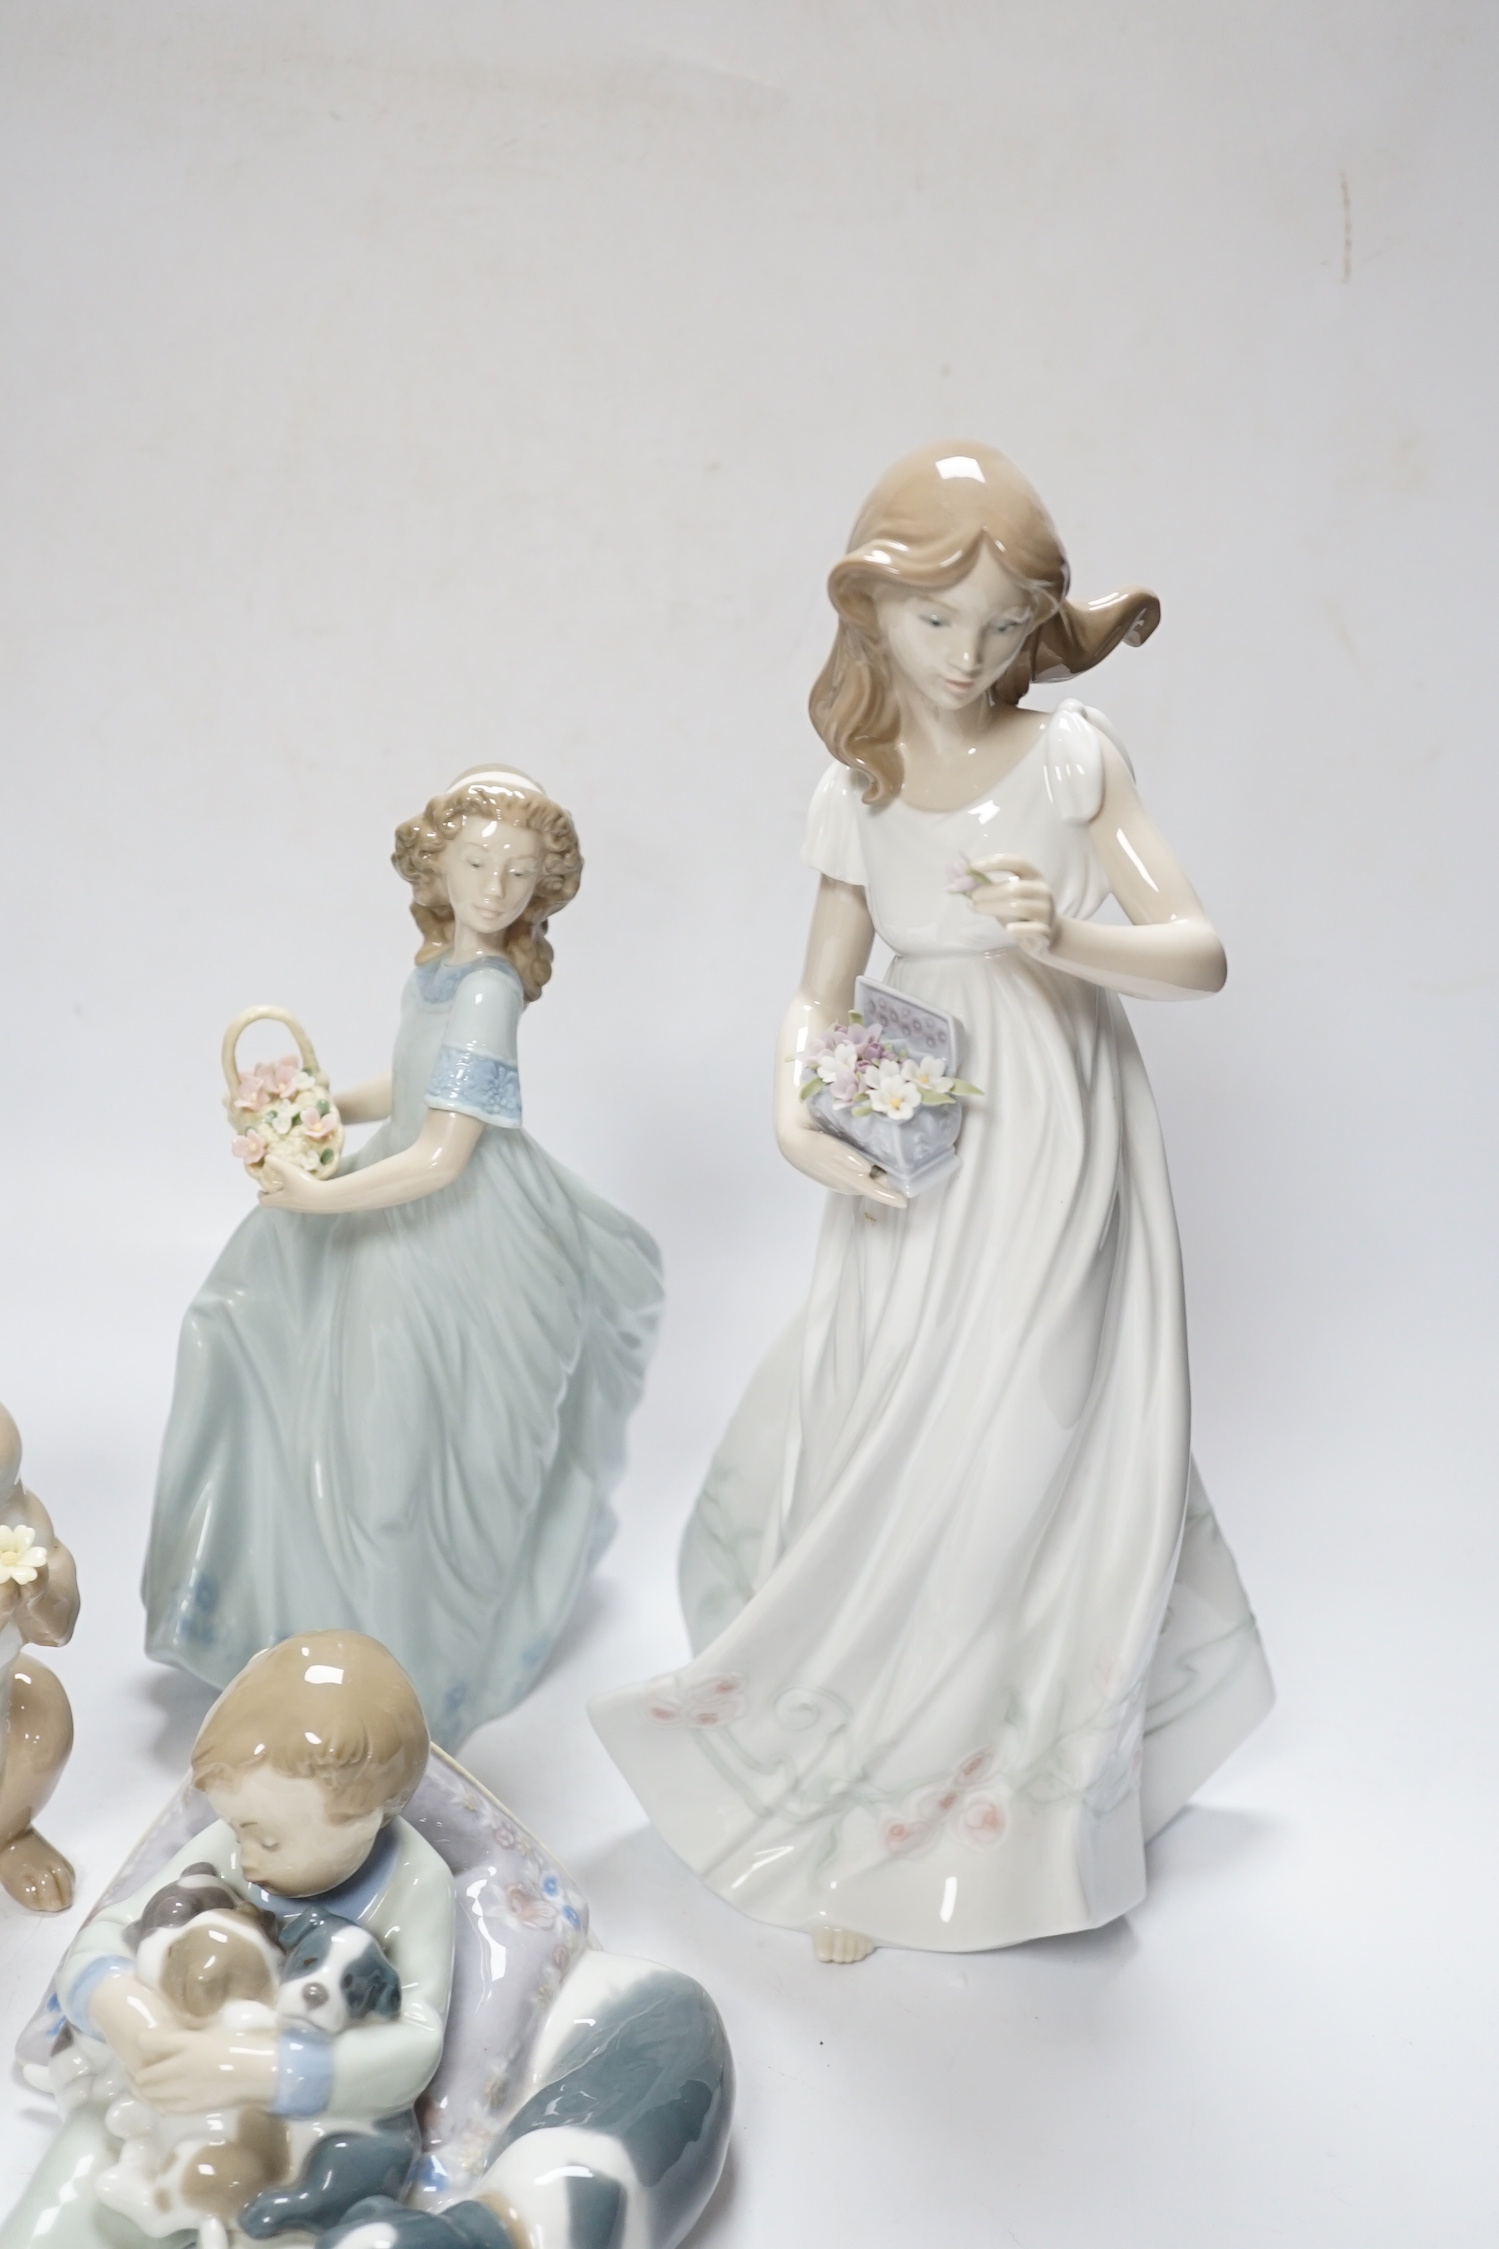 Six Lladro figure groups, Treasures of The Earth, Spring Enchantment, Sweet Dreams, Would You Be Mine, Let’s Make Up and Duckling, all boxed (6)